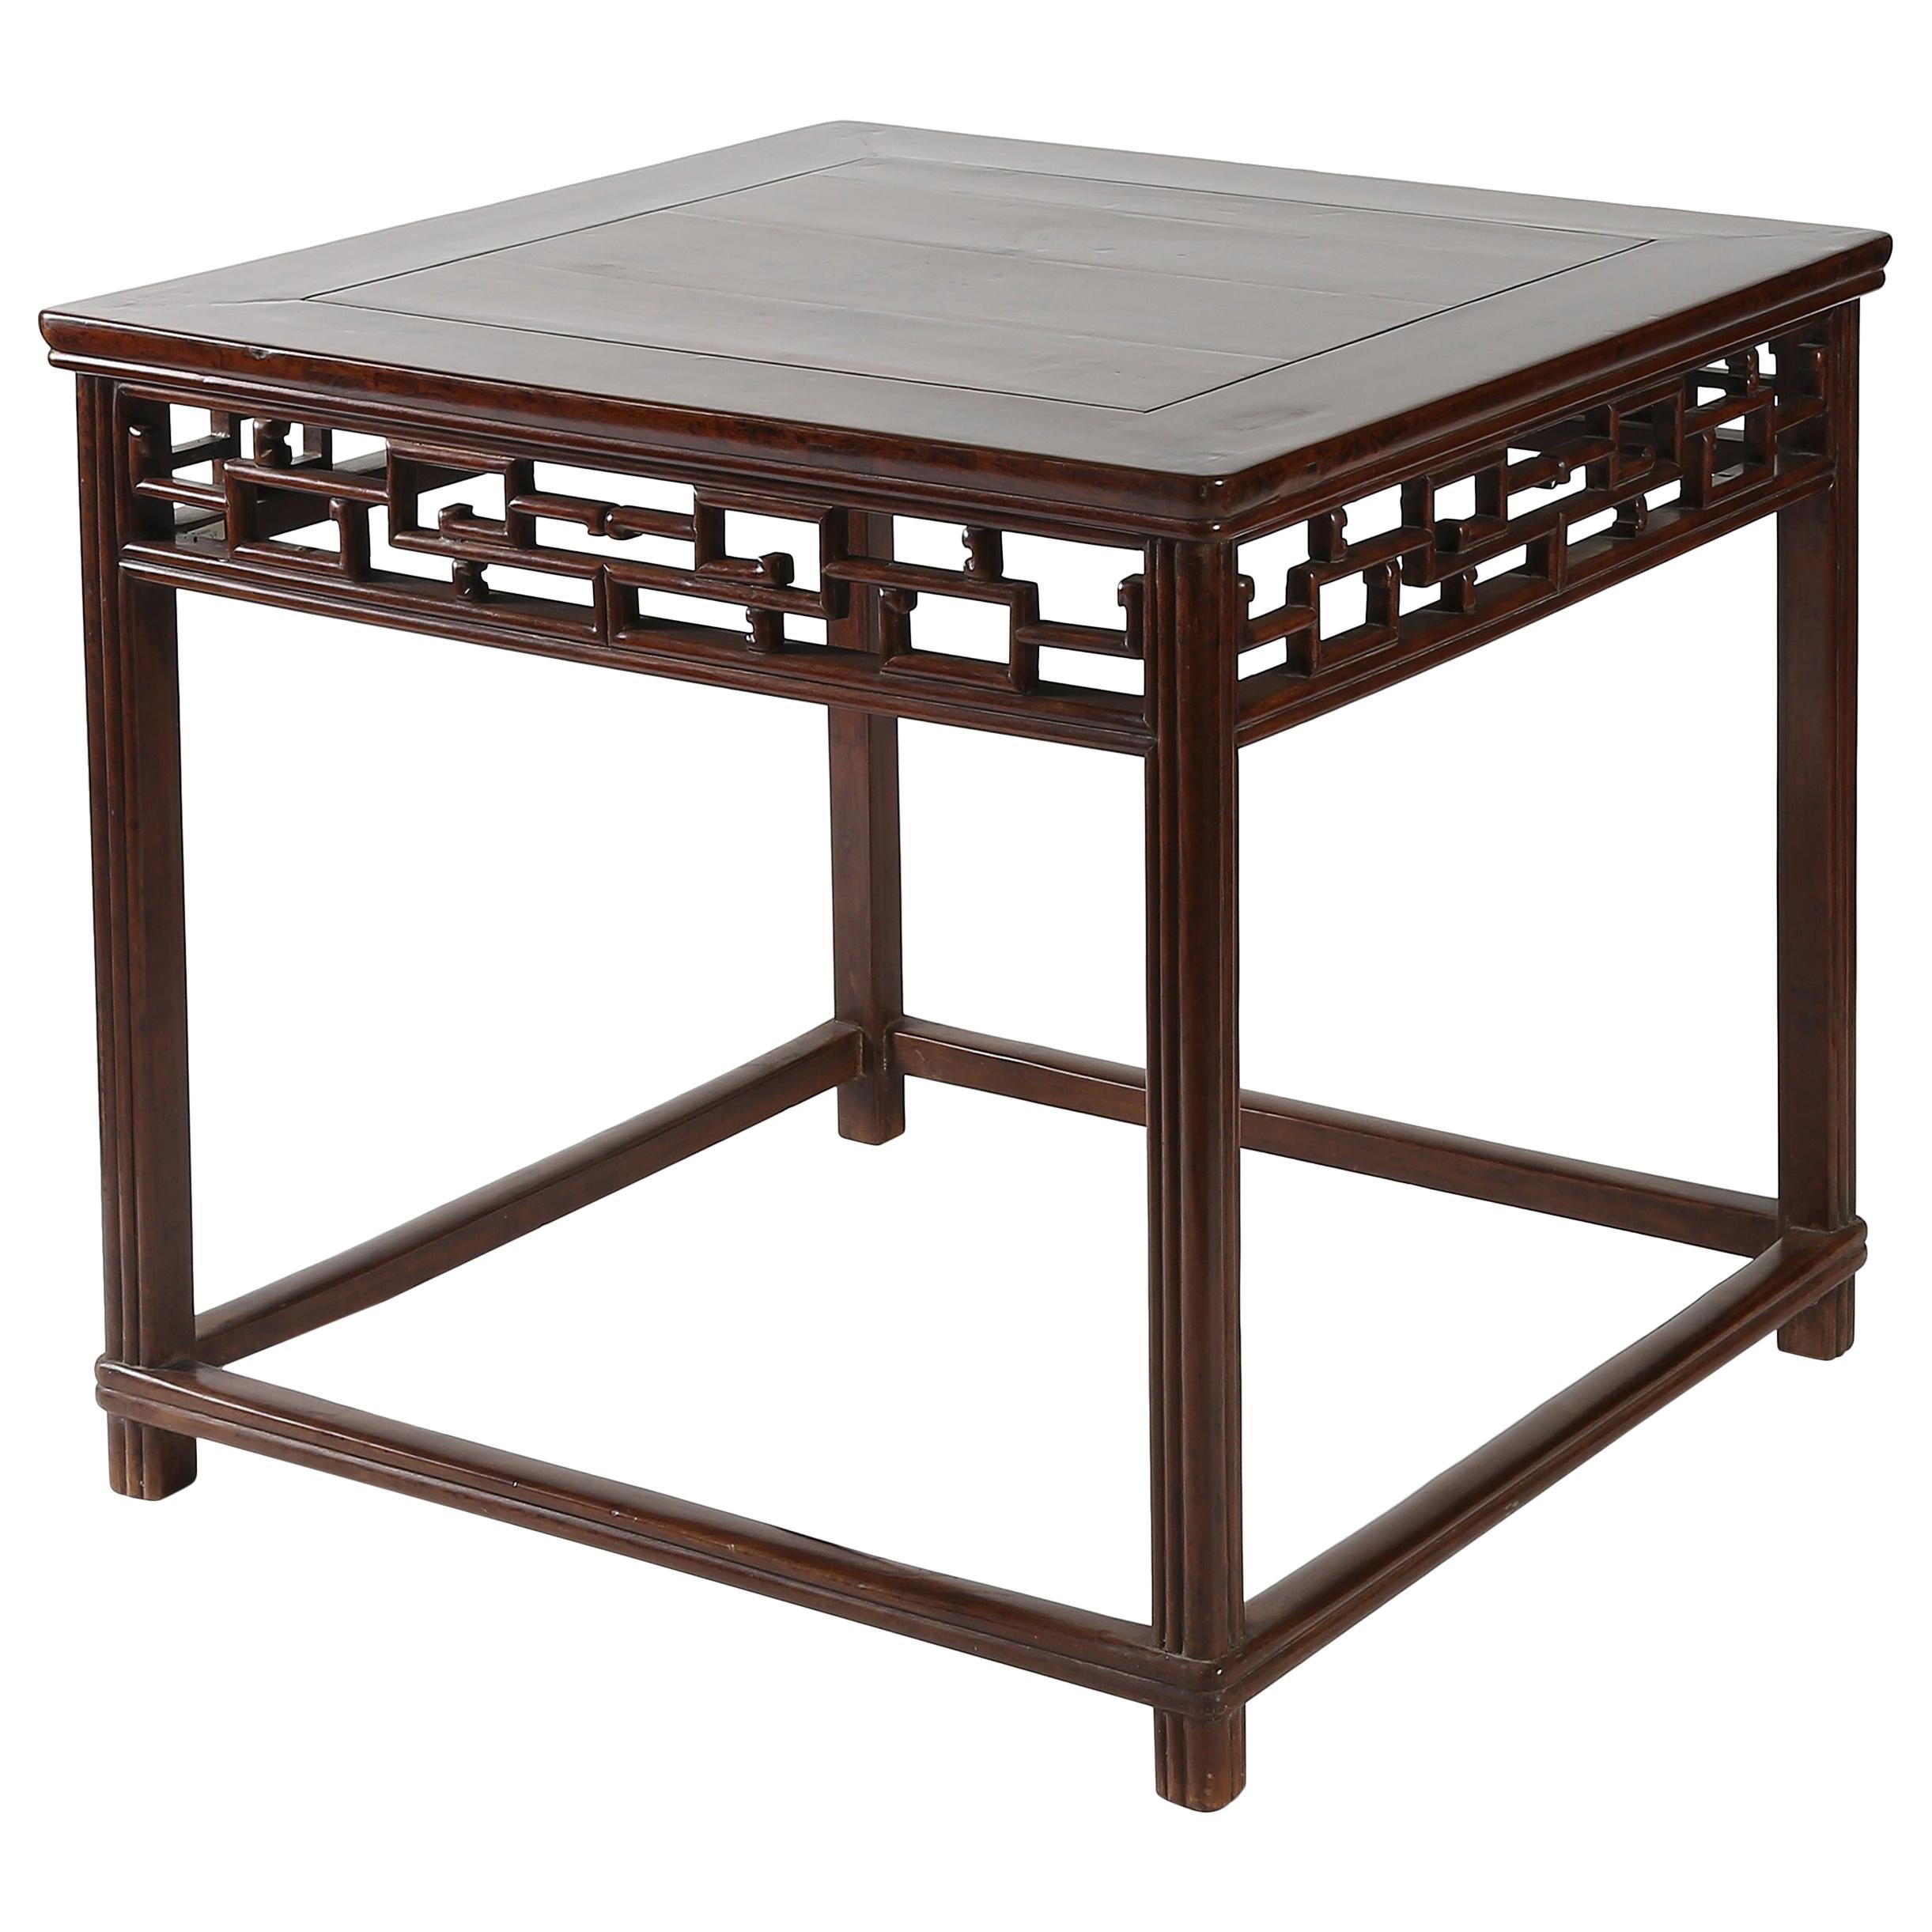 Antique Chinoiserie Walnut Square Display Table with Fretwork Aprons, c. 1800’s For Sale